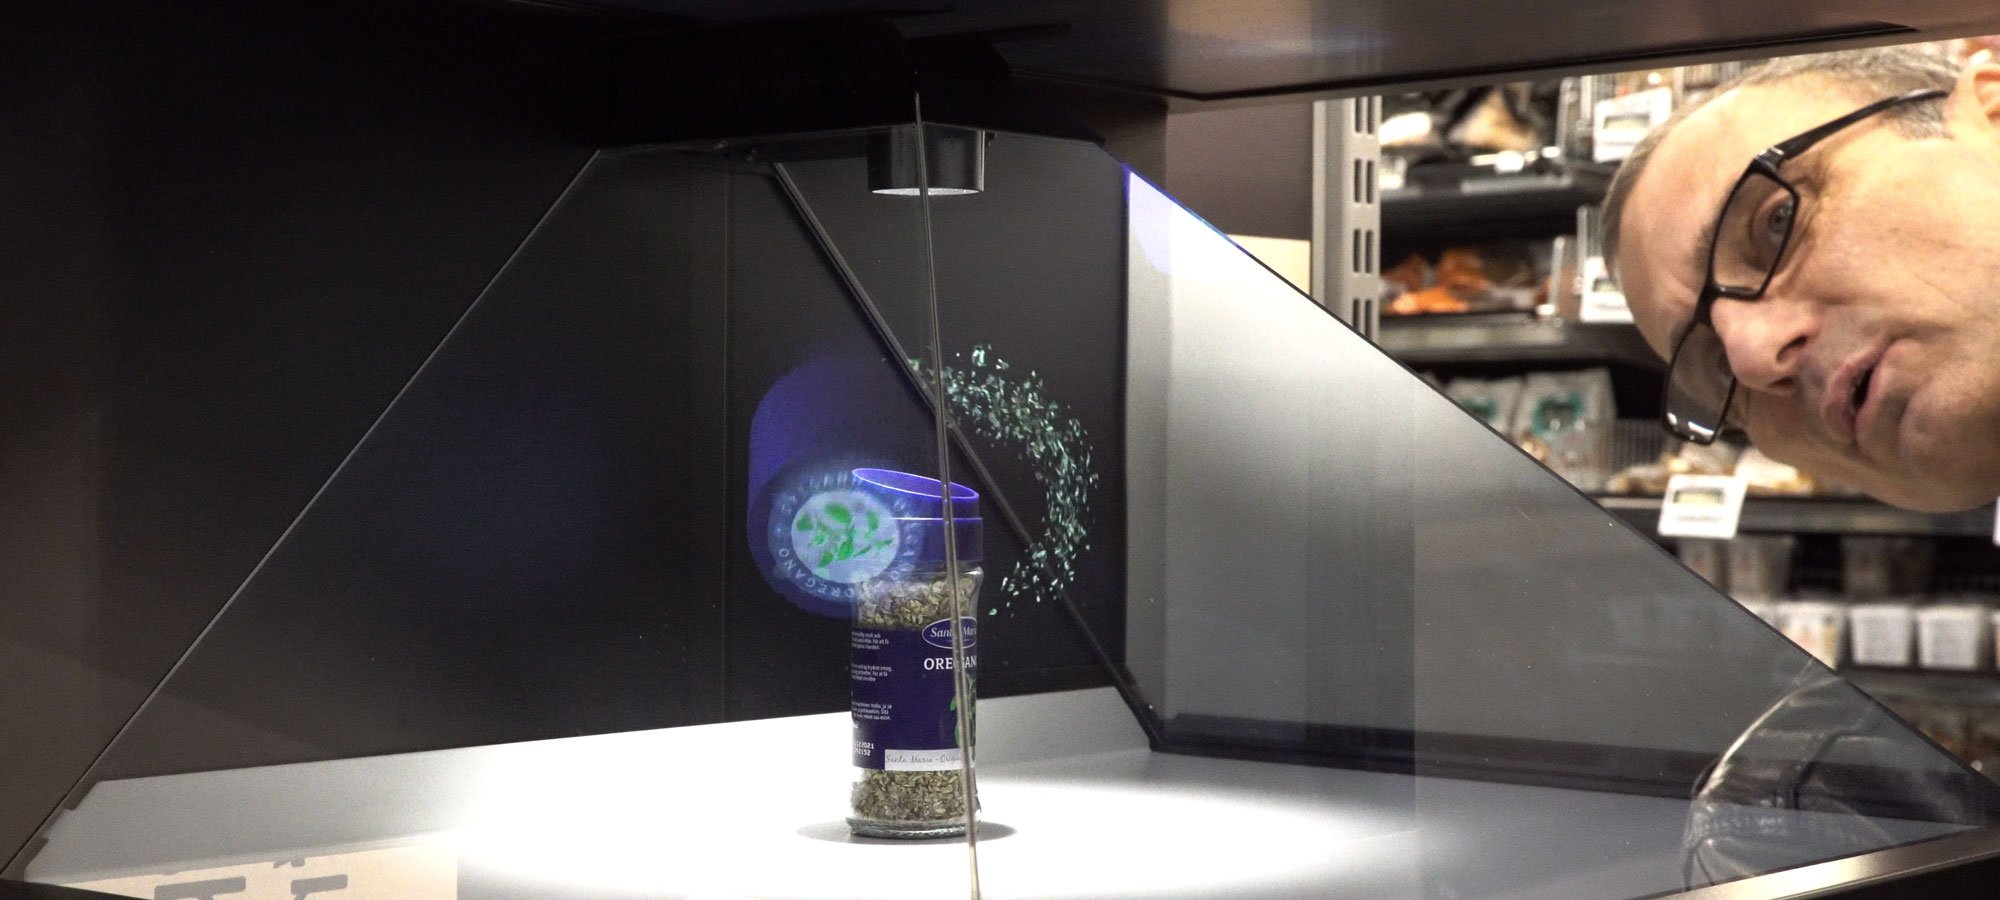 3D holographic display for in store marketing and brand activation